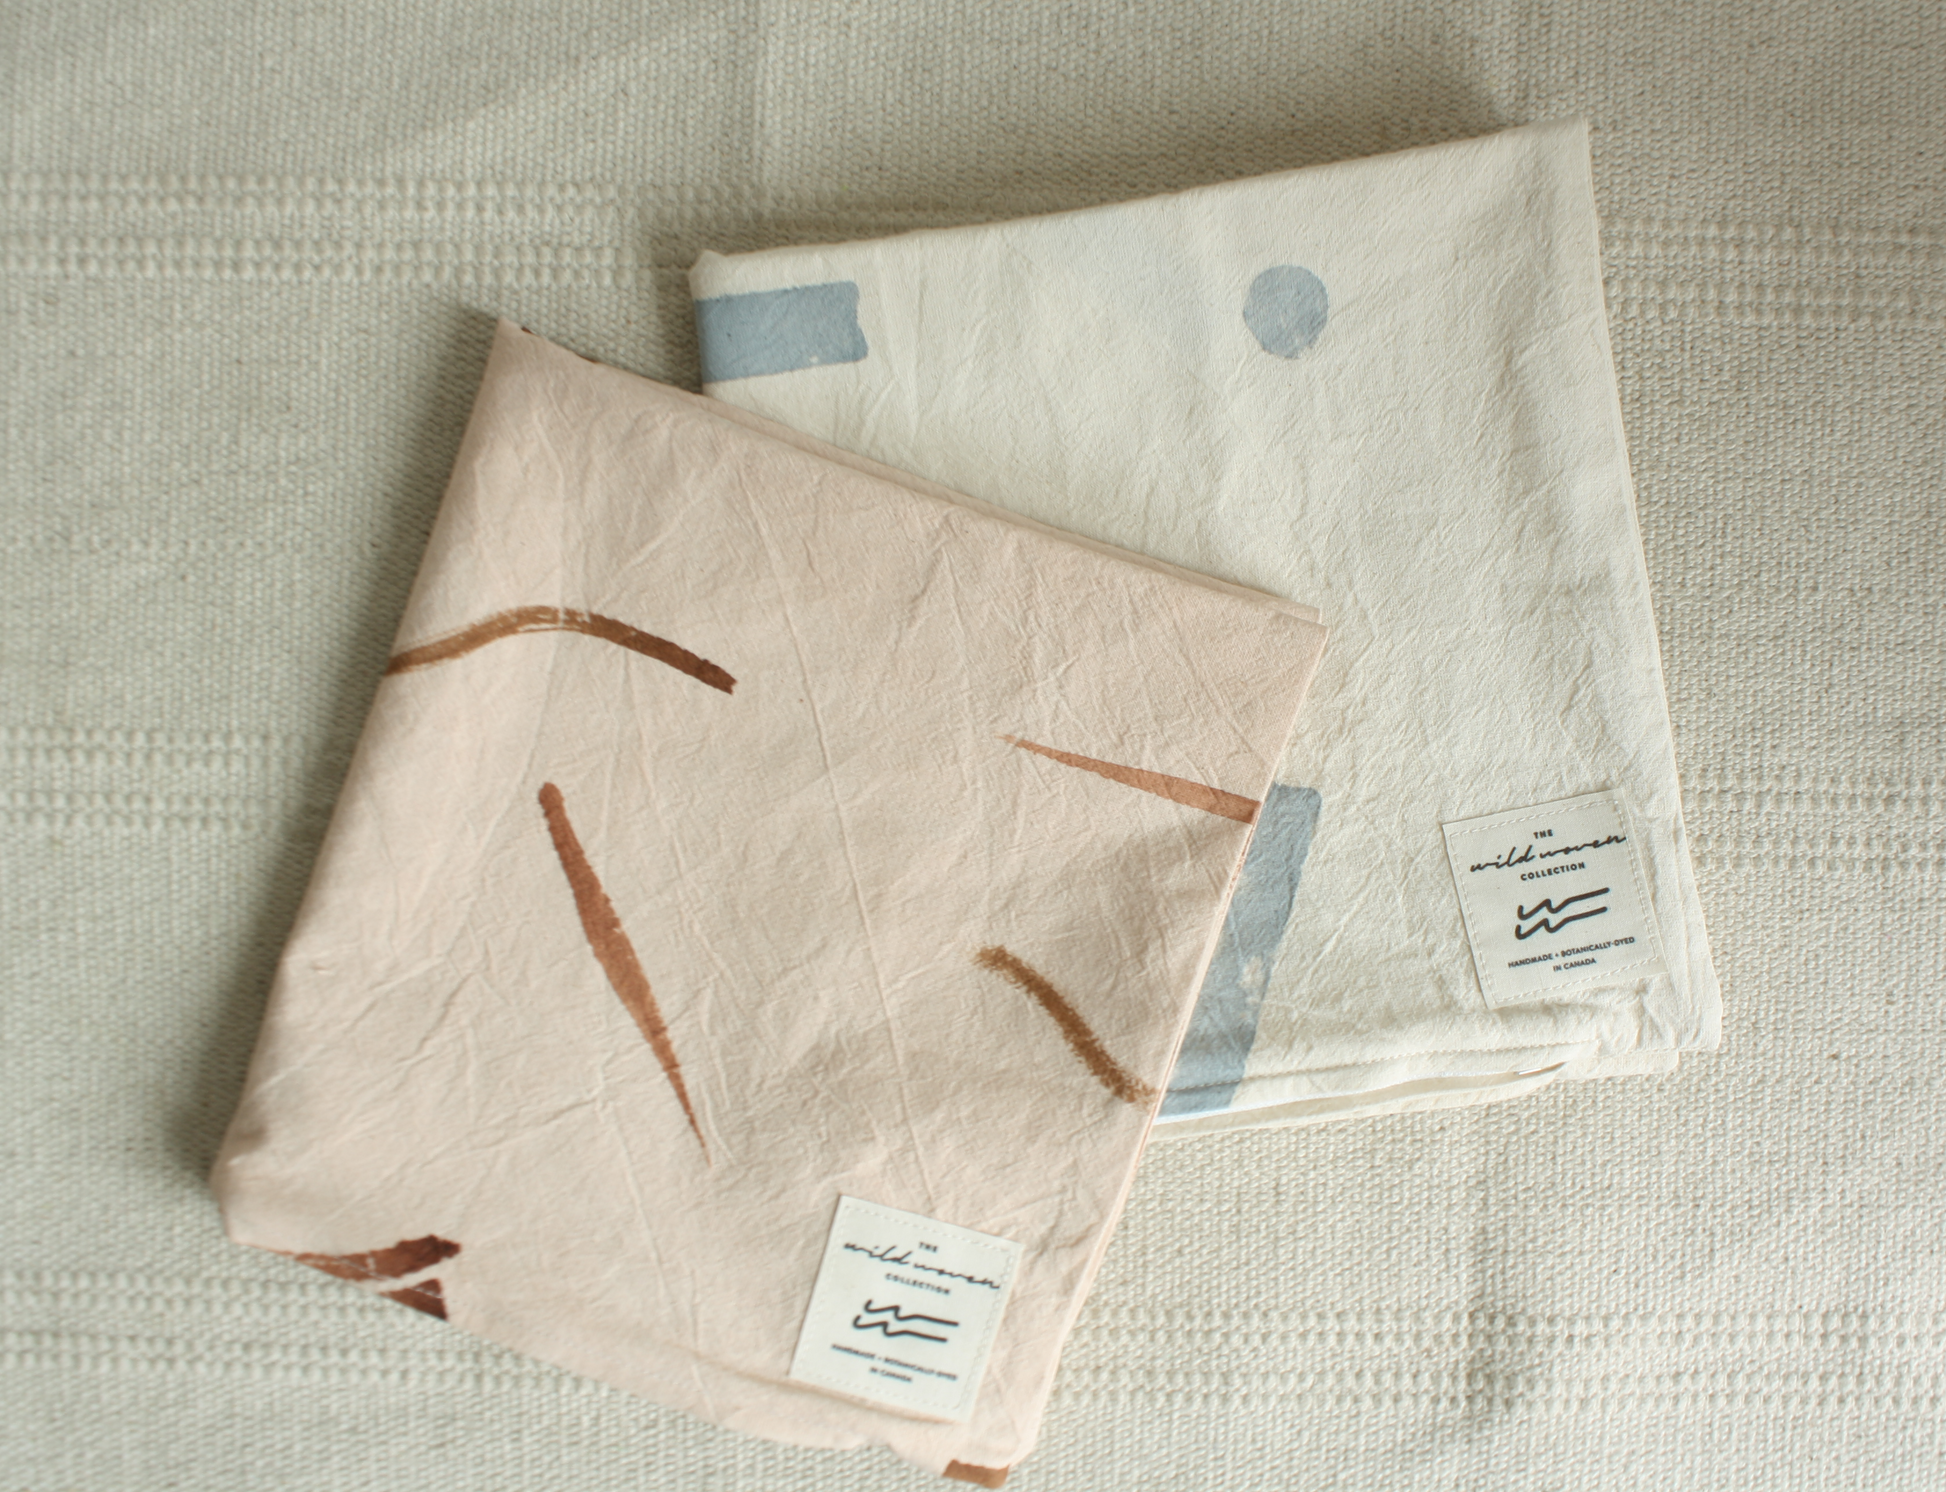 Two organic cotton botanically dyed pillow cases folded and stacked one on top of the other.